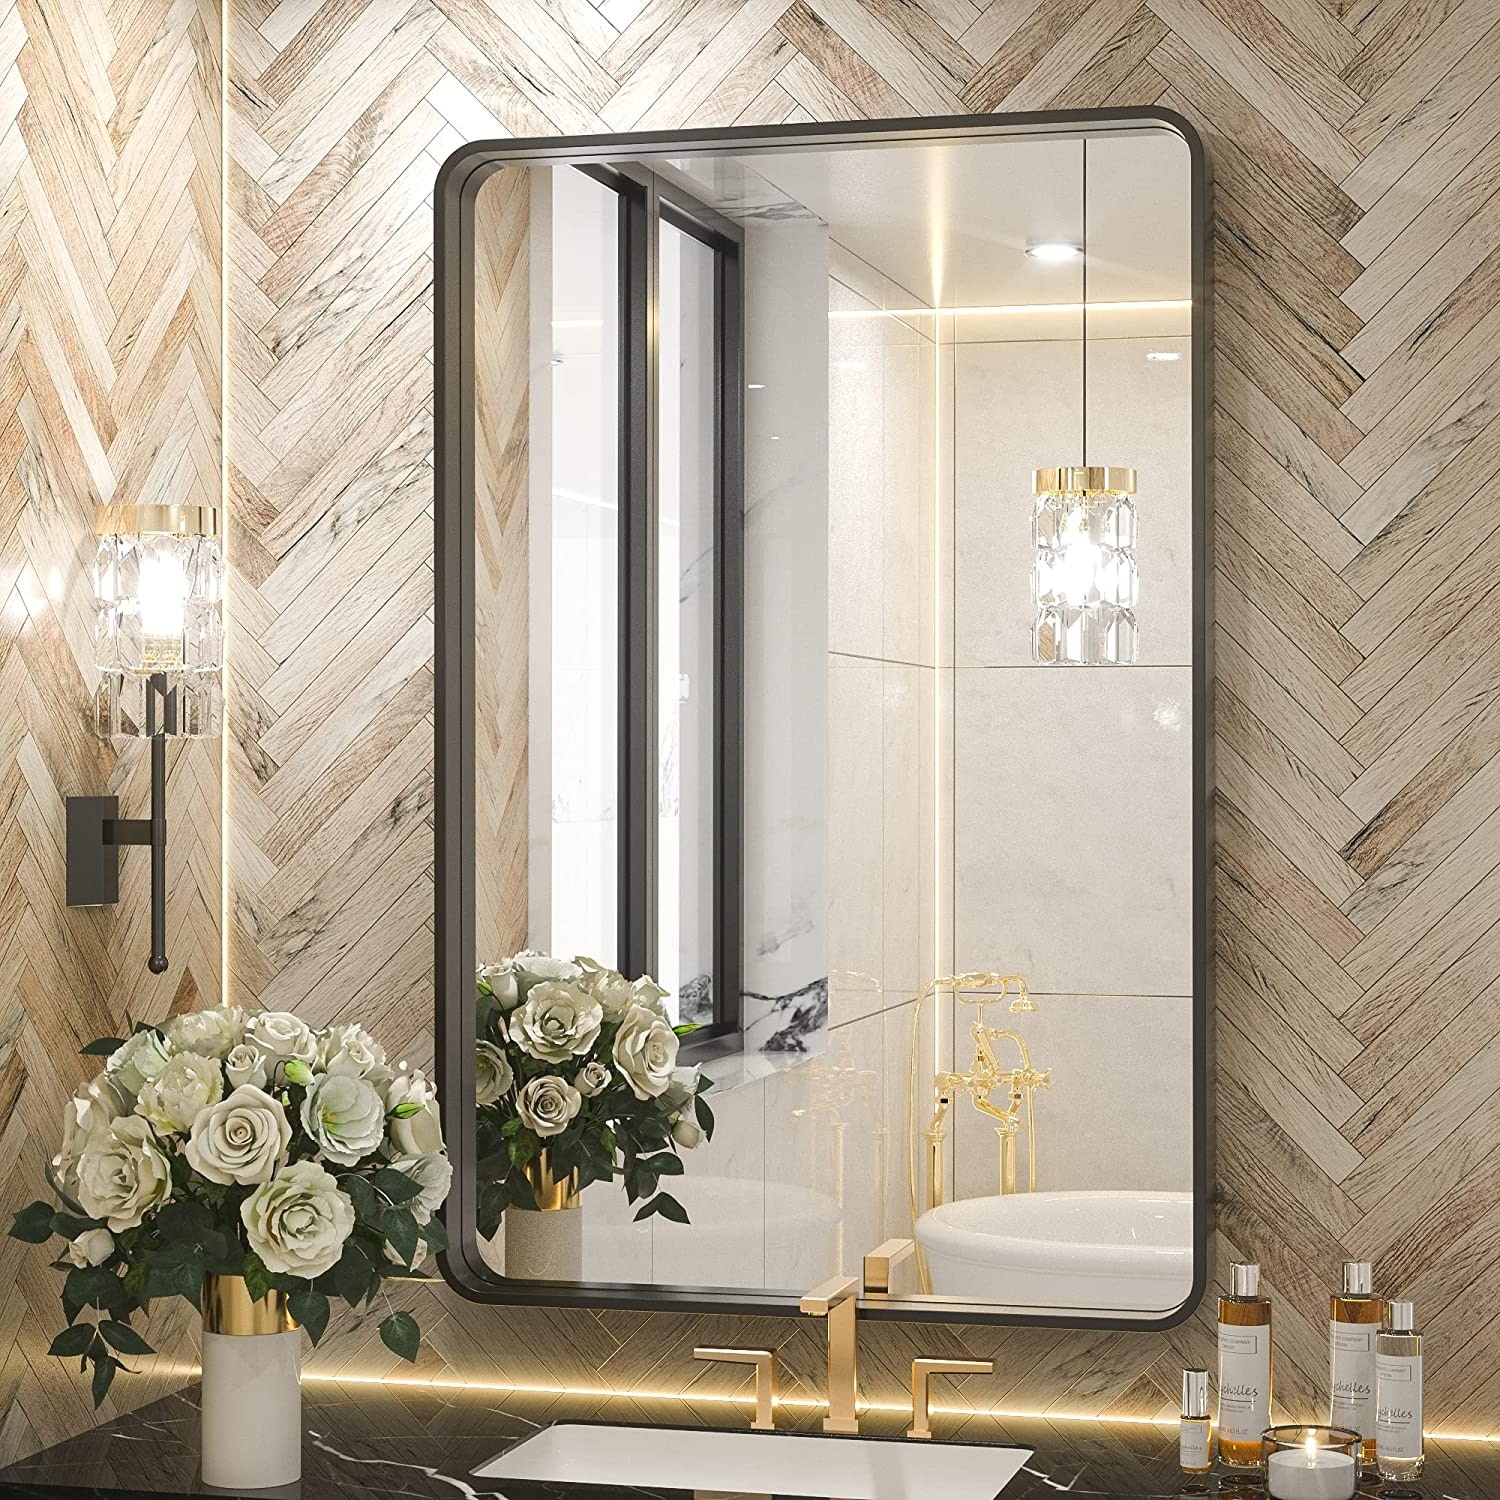 https://ak1.ostkcdn.com/images/products/is/images/direct/0e35e1b28e9d957ac6acca7a9644271c538b03f3/TETOTE-Metal-Frame-Wall-Mirror-for-Bathroom%2C-Round-Corner-Hangs-Bedroom-Wall-Mirror-%28Horizontal-Vertical%29.jpg